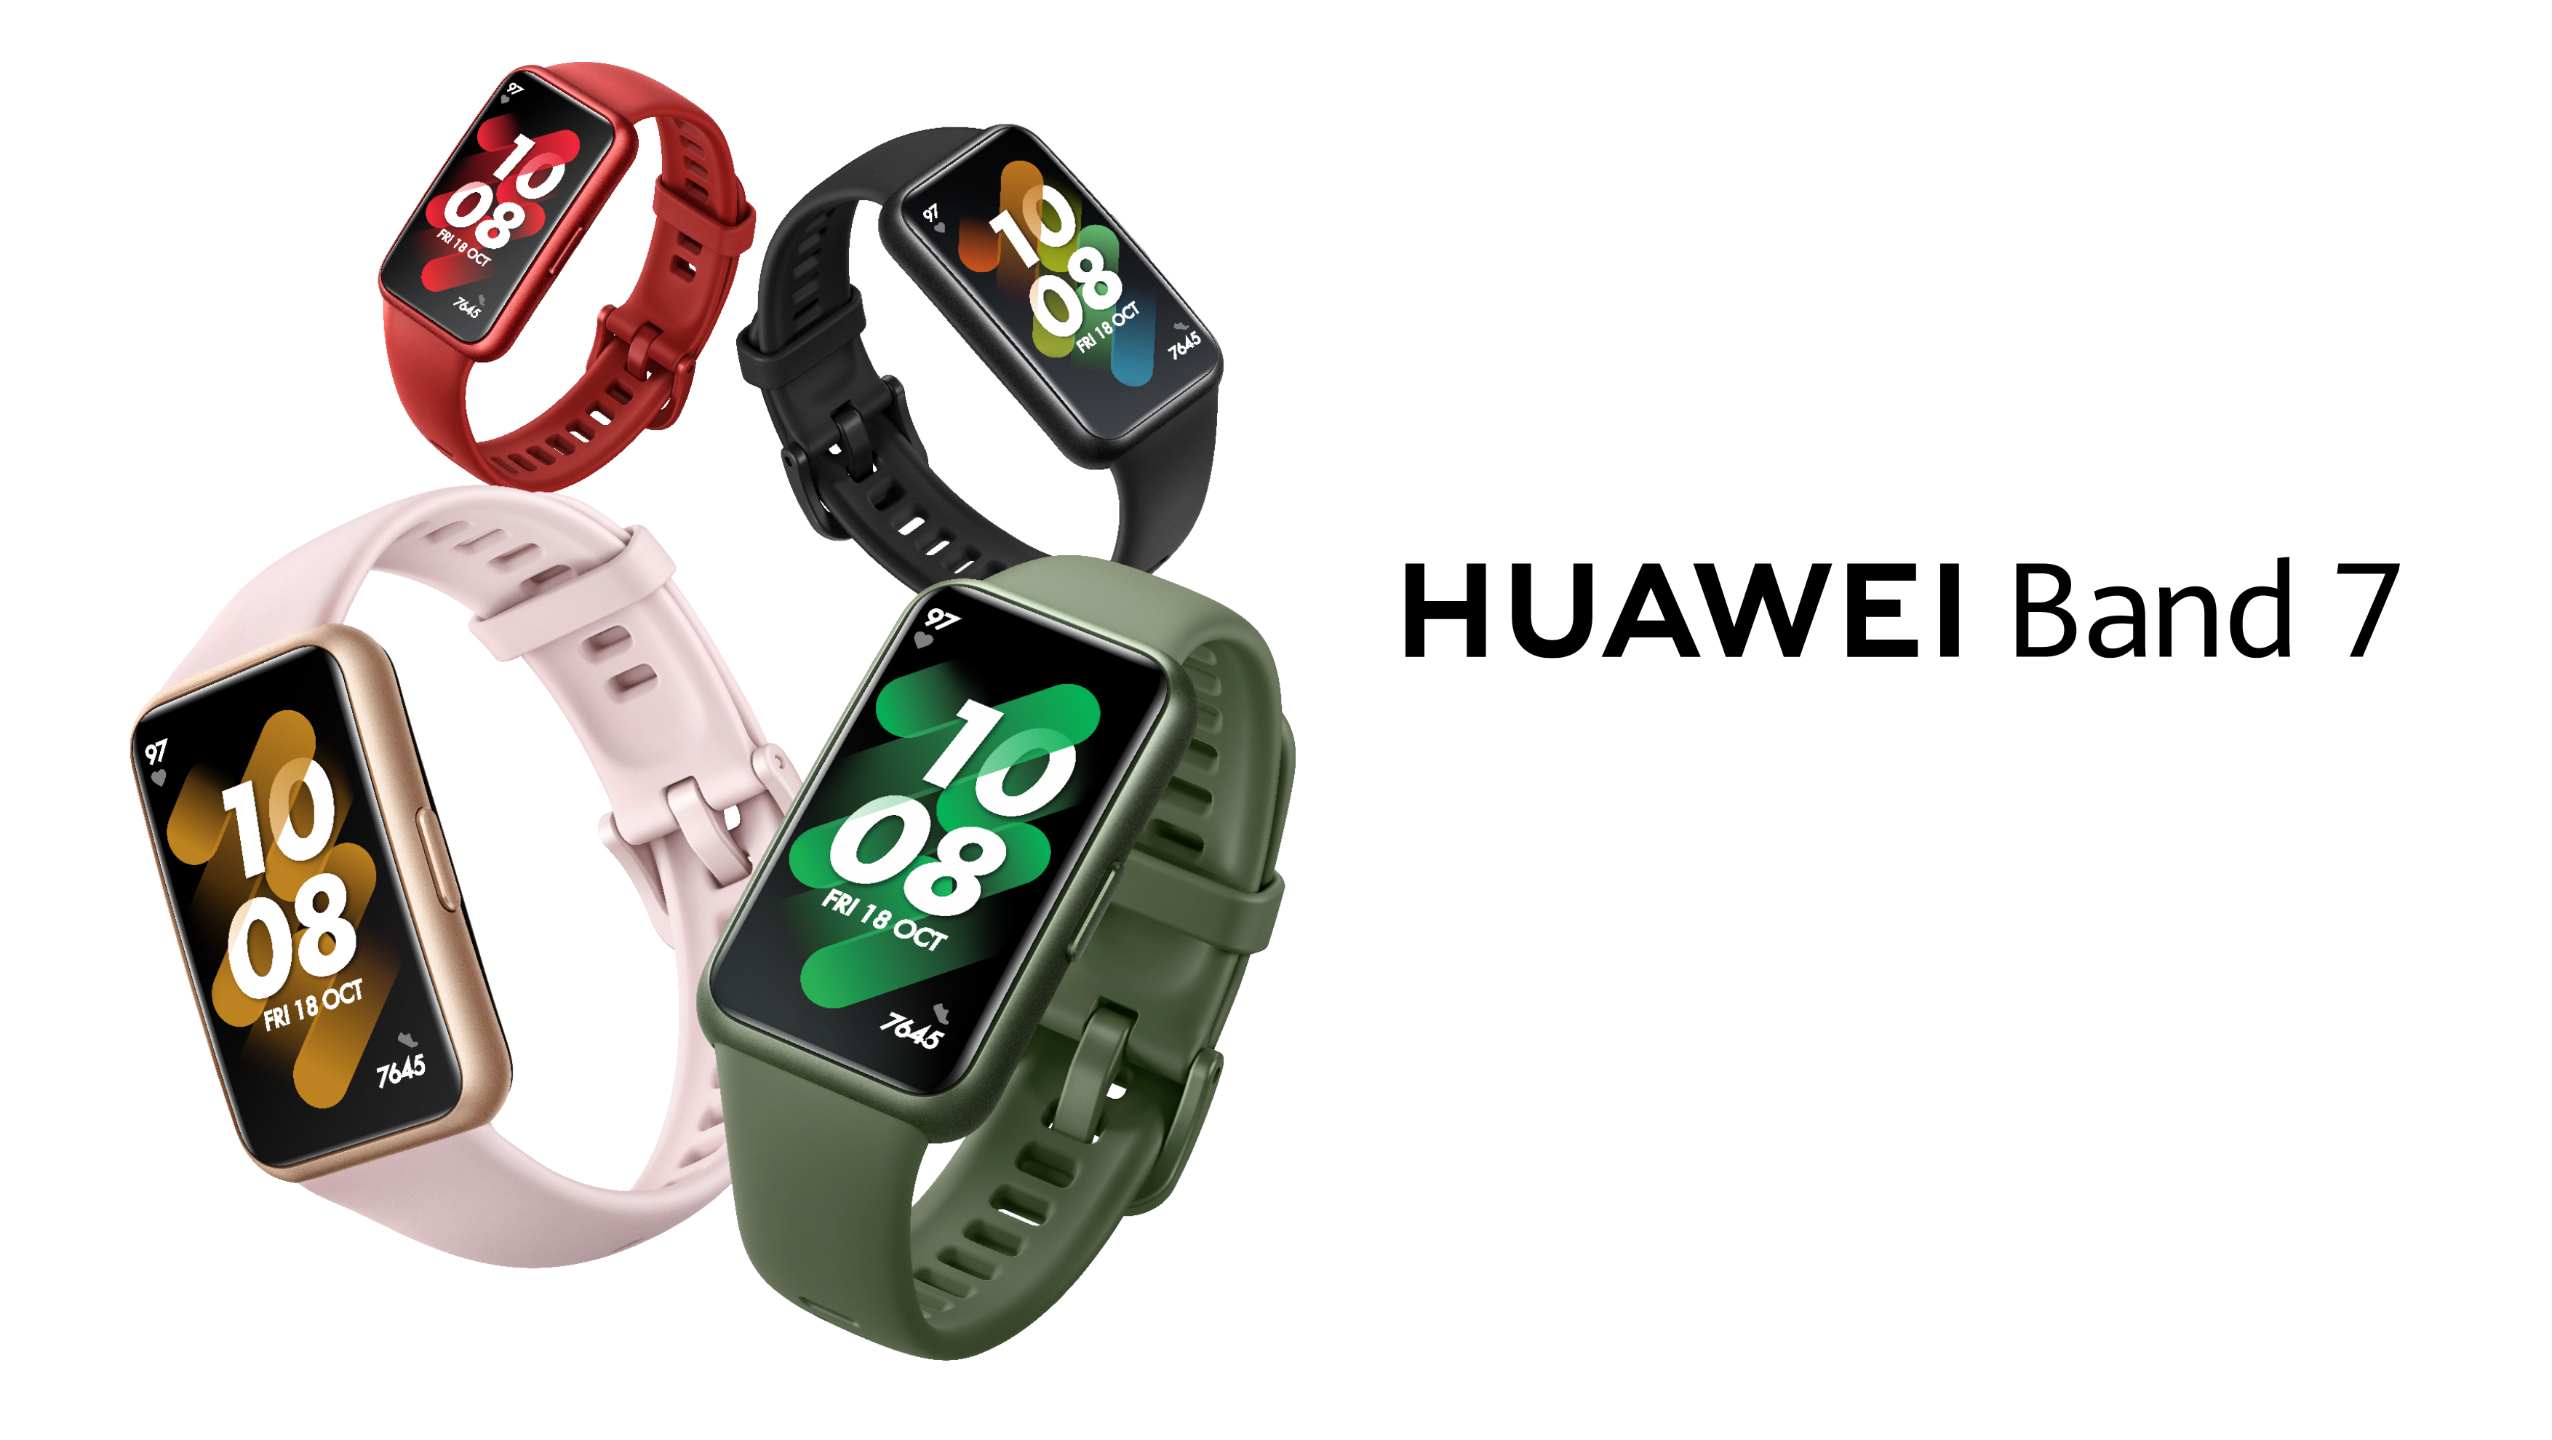 Huawei Band 8: An Affordable Smart Watch and Fitness Tracker